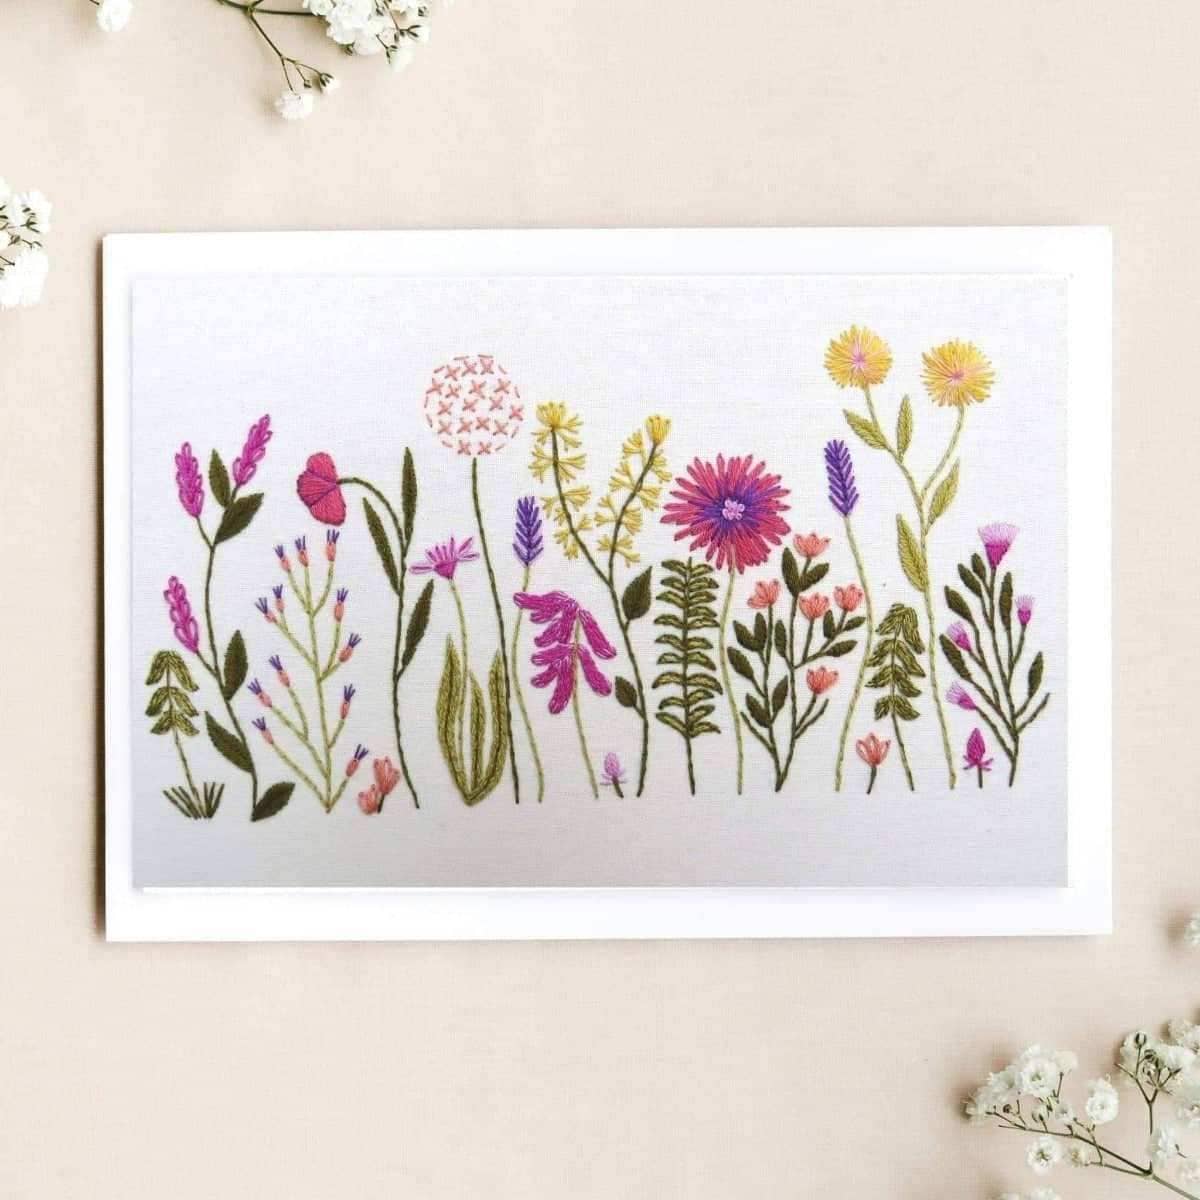 Meadow Flowers, Pre Printed Embroidery Fabric Panel PLUS PDF Pattern , Pre Printed Fabric Pattern , StitchDoodles , bird embroidery, Embroidery, embroidery hoop, embroidery hoop kit, embroidery kit for adults, embroidery kit for beginers, embroidery kits for beginners, embroidery pattern, garden embroidery, hand embroidery, hand embroidery fabric, hand embroidery kit, hand embroidery seat frame, nurge embroidery hoop, PDF pattern, Printed Pattern , StitchDoodles , shop.stitchdoodles.com